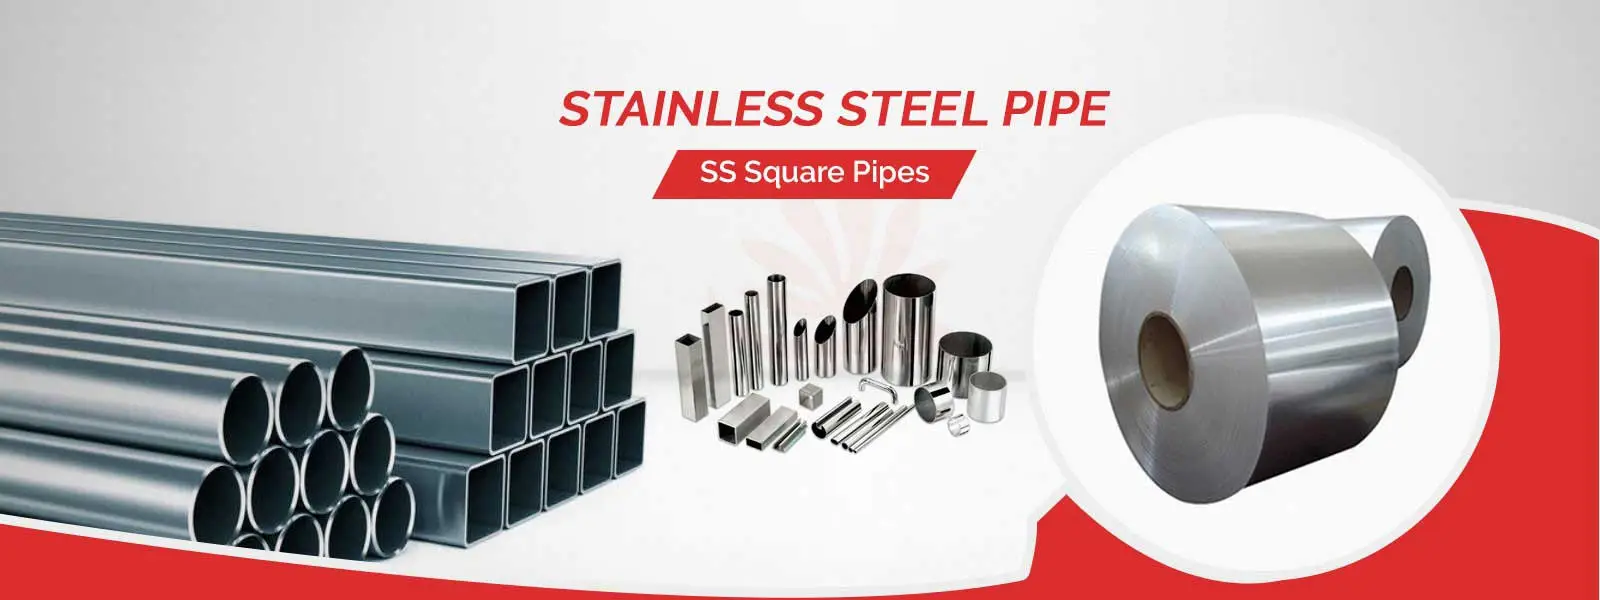 Stainless Steel Pipe Manufacturers in Jhansi